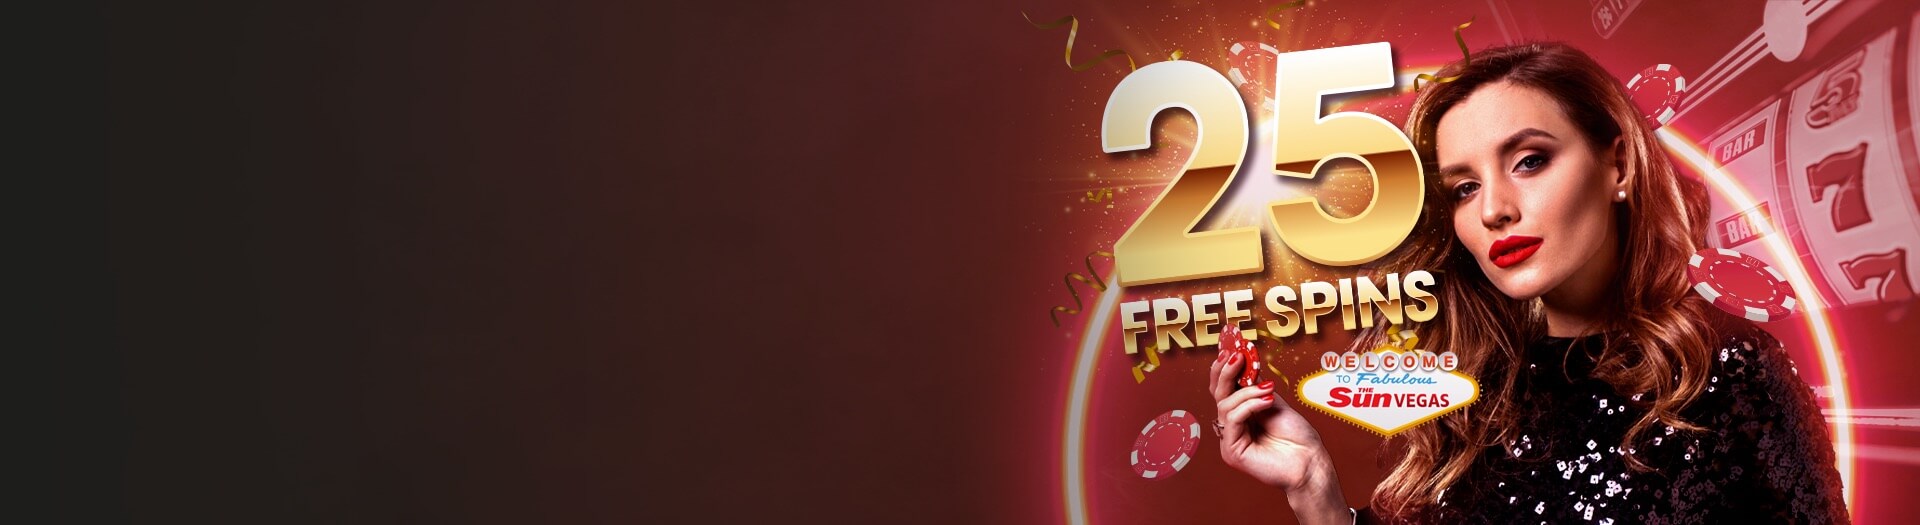 25 free spins banner with dealer holding chips